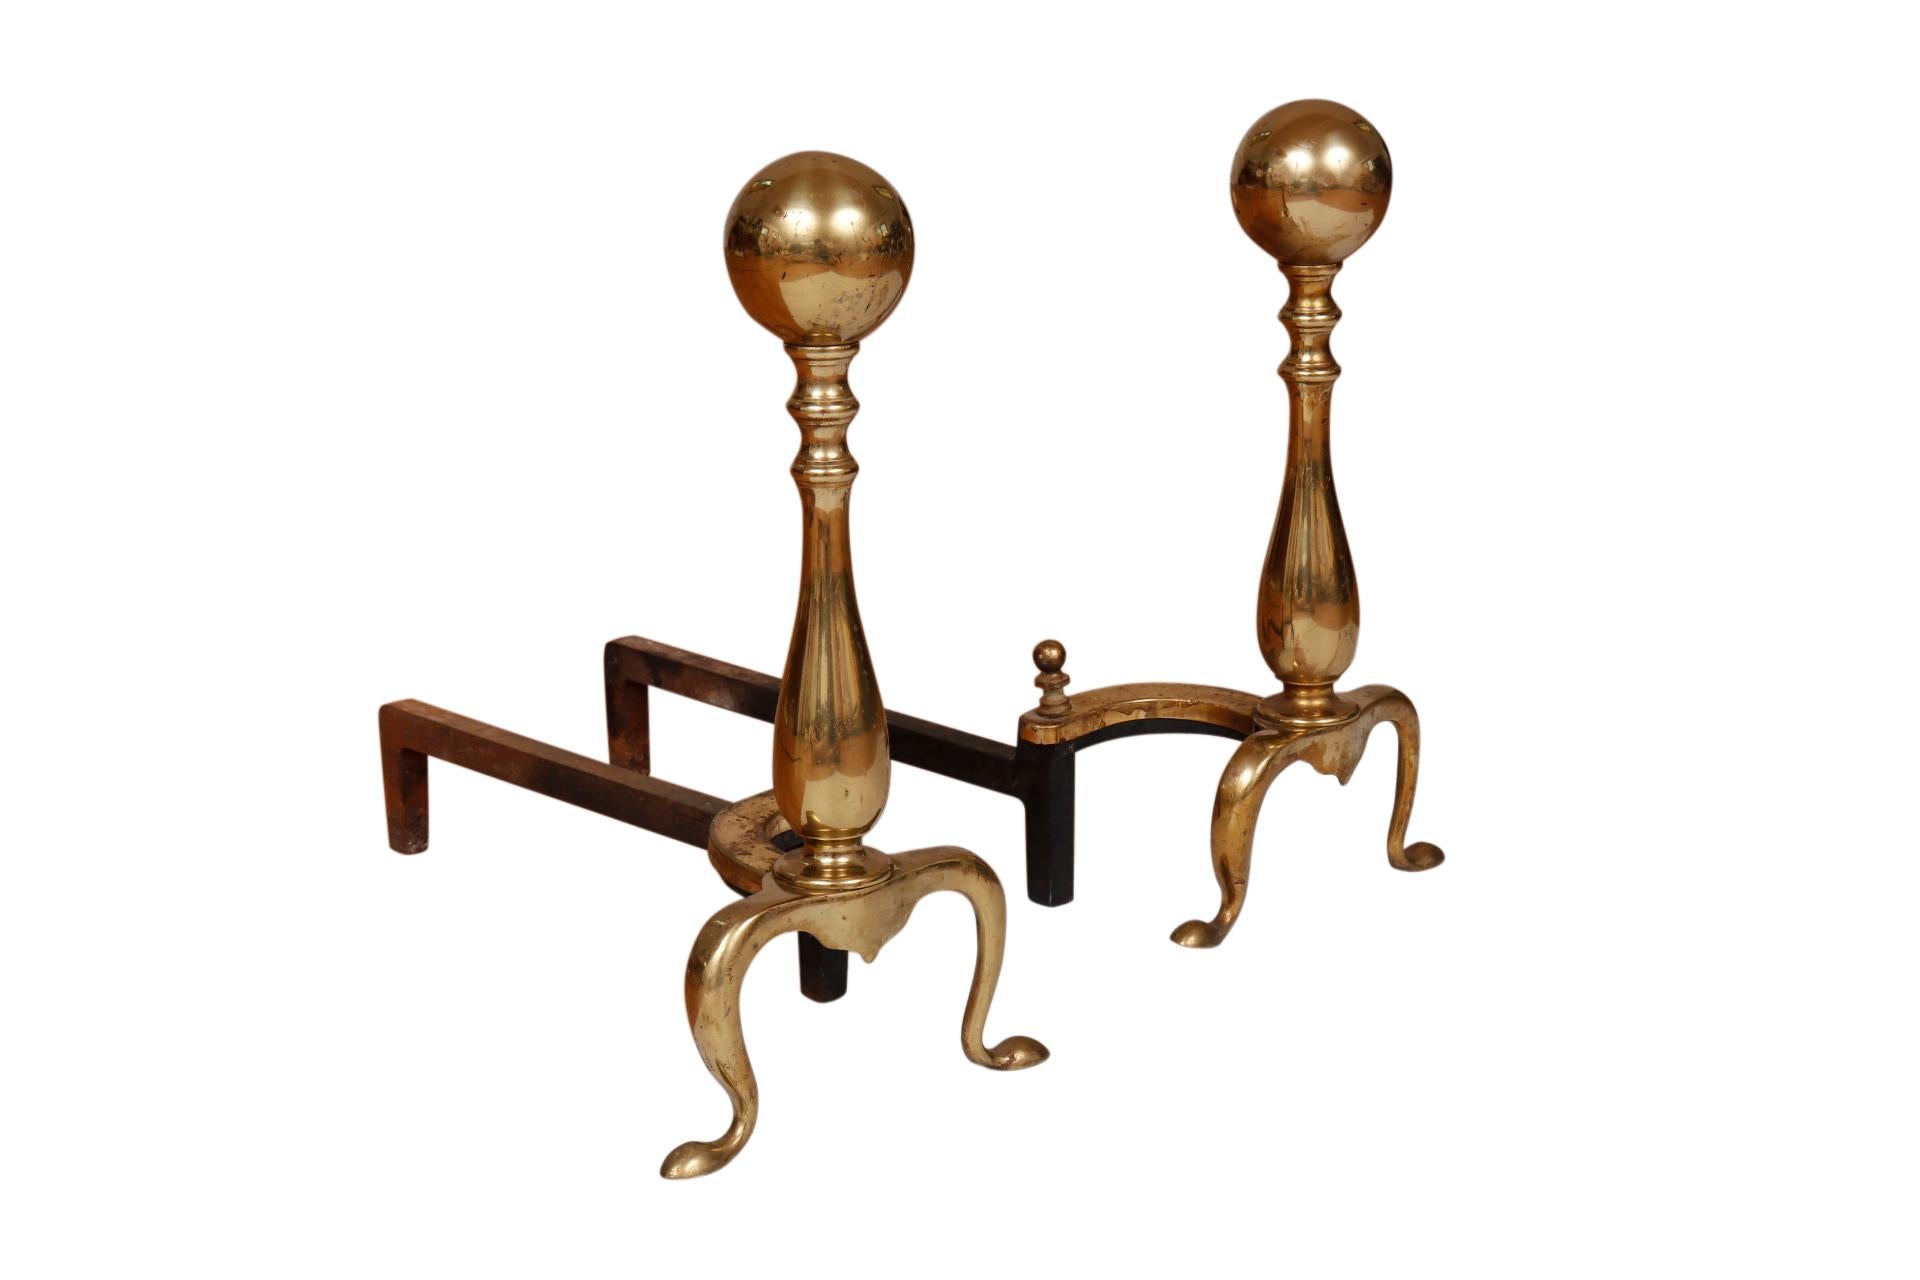 A pair of ball topped brass andirons made by Puritan Manufacturing Co. Elegant turned plinths are supported with serpentine legs finished with snake feet. Iron billet bars are pressed with the makers mark “Puritan”. Dimensions per andiron.